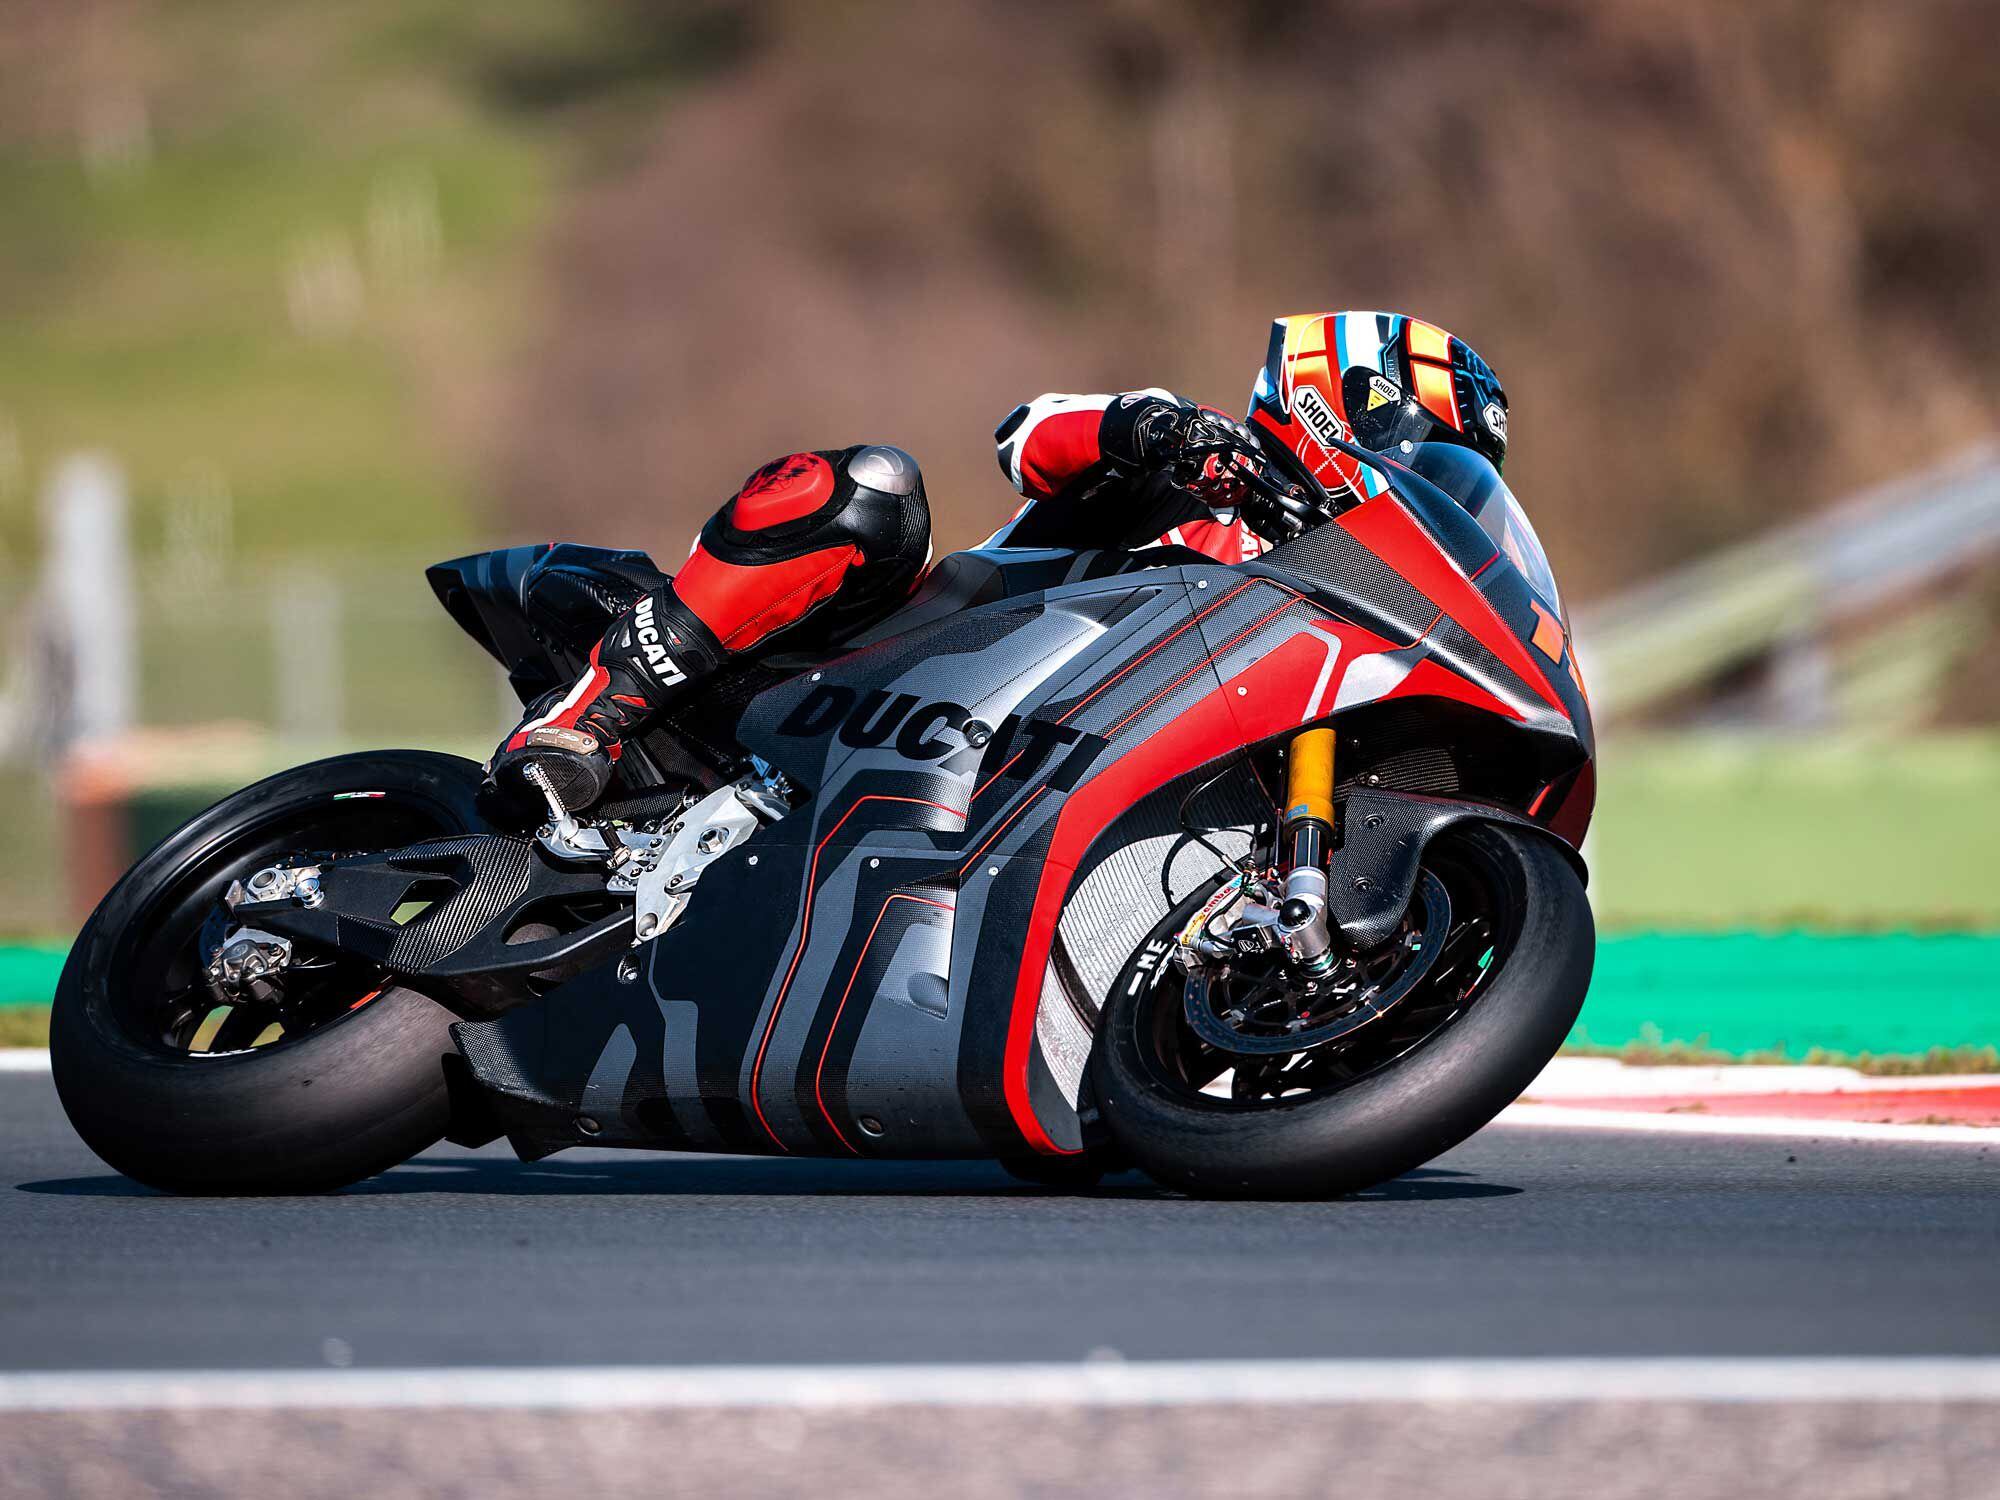 The new MotoE machine, the V21L, looks to be everything Ducati promised it would be: a legitimate racebike.